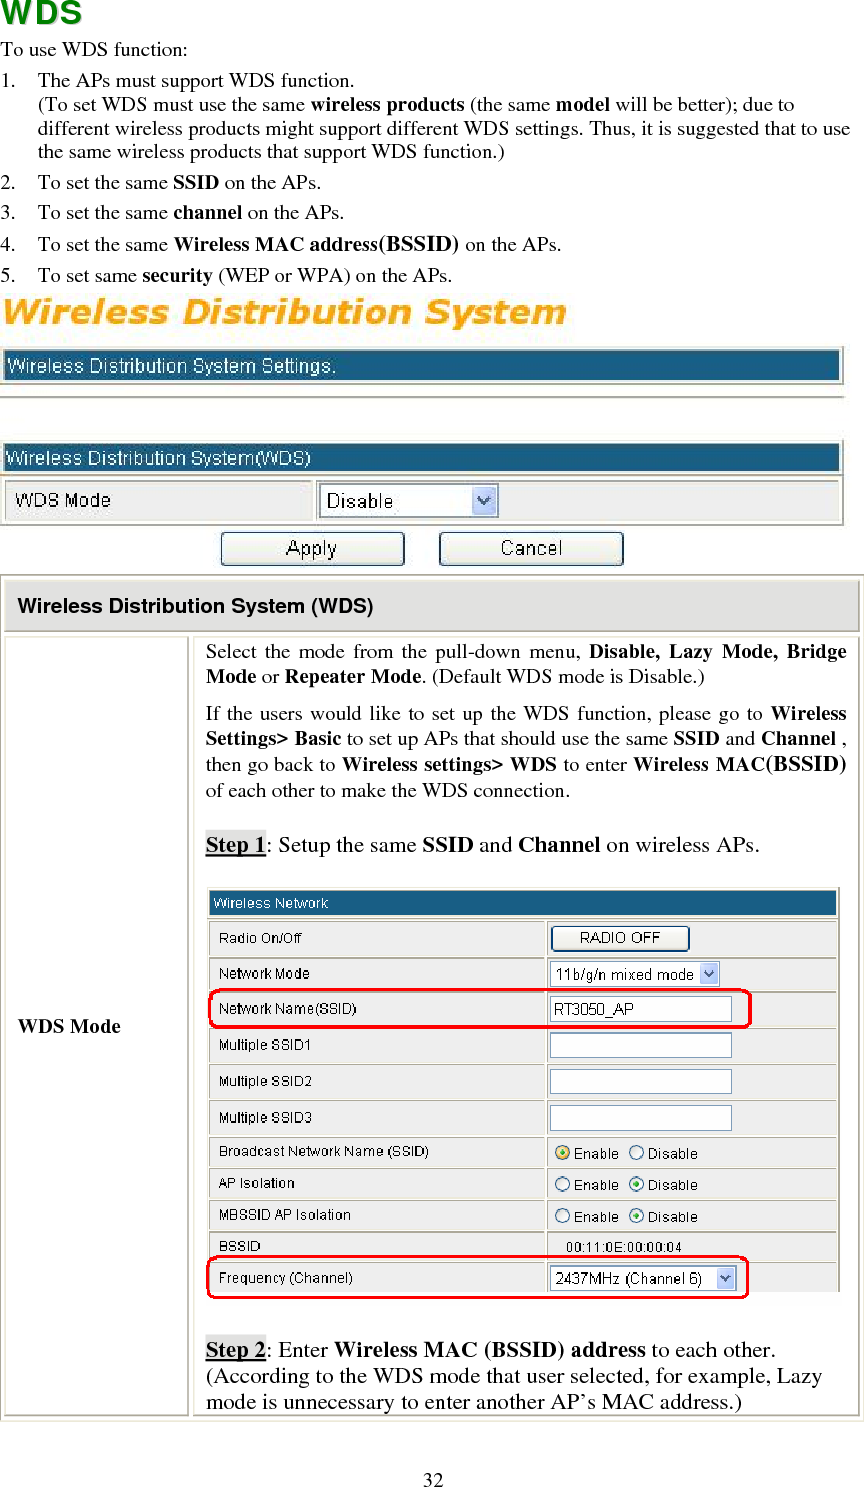   32WWDDSS  To use WDS function: 1. The APs must support WDS function.  (To set WDS must use the same wireless products (the same model will be better); due to different wireless products might support different WDS settings. Thus, it is suggested that to use the same wireless products that support WDS function.) 2. To set the same SSID on the APs. 3. To set the same channel on the APs. 4. To set the same Wireless MAC address(BSSID) on the APs. 5. To set same security (WEP or WPA) on the APs.  Wireless Distribution System (WDS) WDS Mode Select the mode from the pull-down menu, Disable, Lazy Mode, Bridge Mode or Repeater Mode. (Default WDS mode is Disable.) If the users would like to set up the WDS function, please go to Wireless Settings&gt; Basic to set up APs that should use the same SSID and Channel , then go back to Wireless settings&gt; WDS to enter Wireless MAC(BSSID) of each other to make the WDS connection. Step 1: Setup the same SSID and Channel on wireless APs.  Step 2: Enter Wireless MAC (BSSID) address to each other. (According to the WDS mode that user selected, for example, Lazy mode is unnecessary to enter another AP’s MAC address.) 